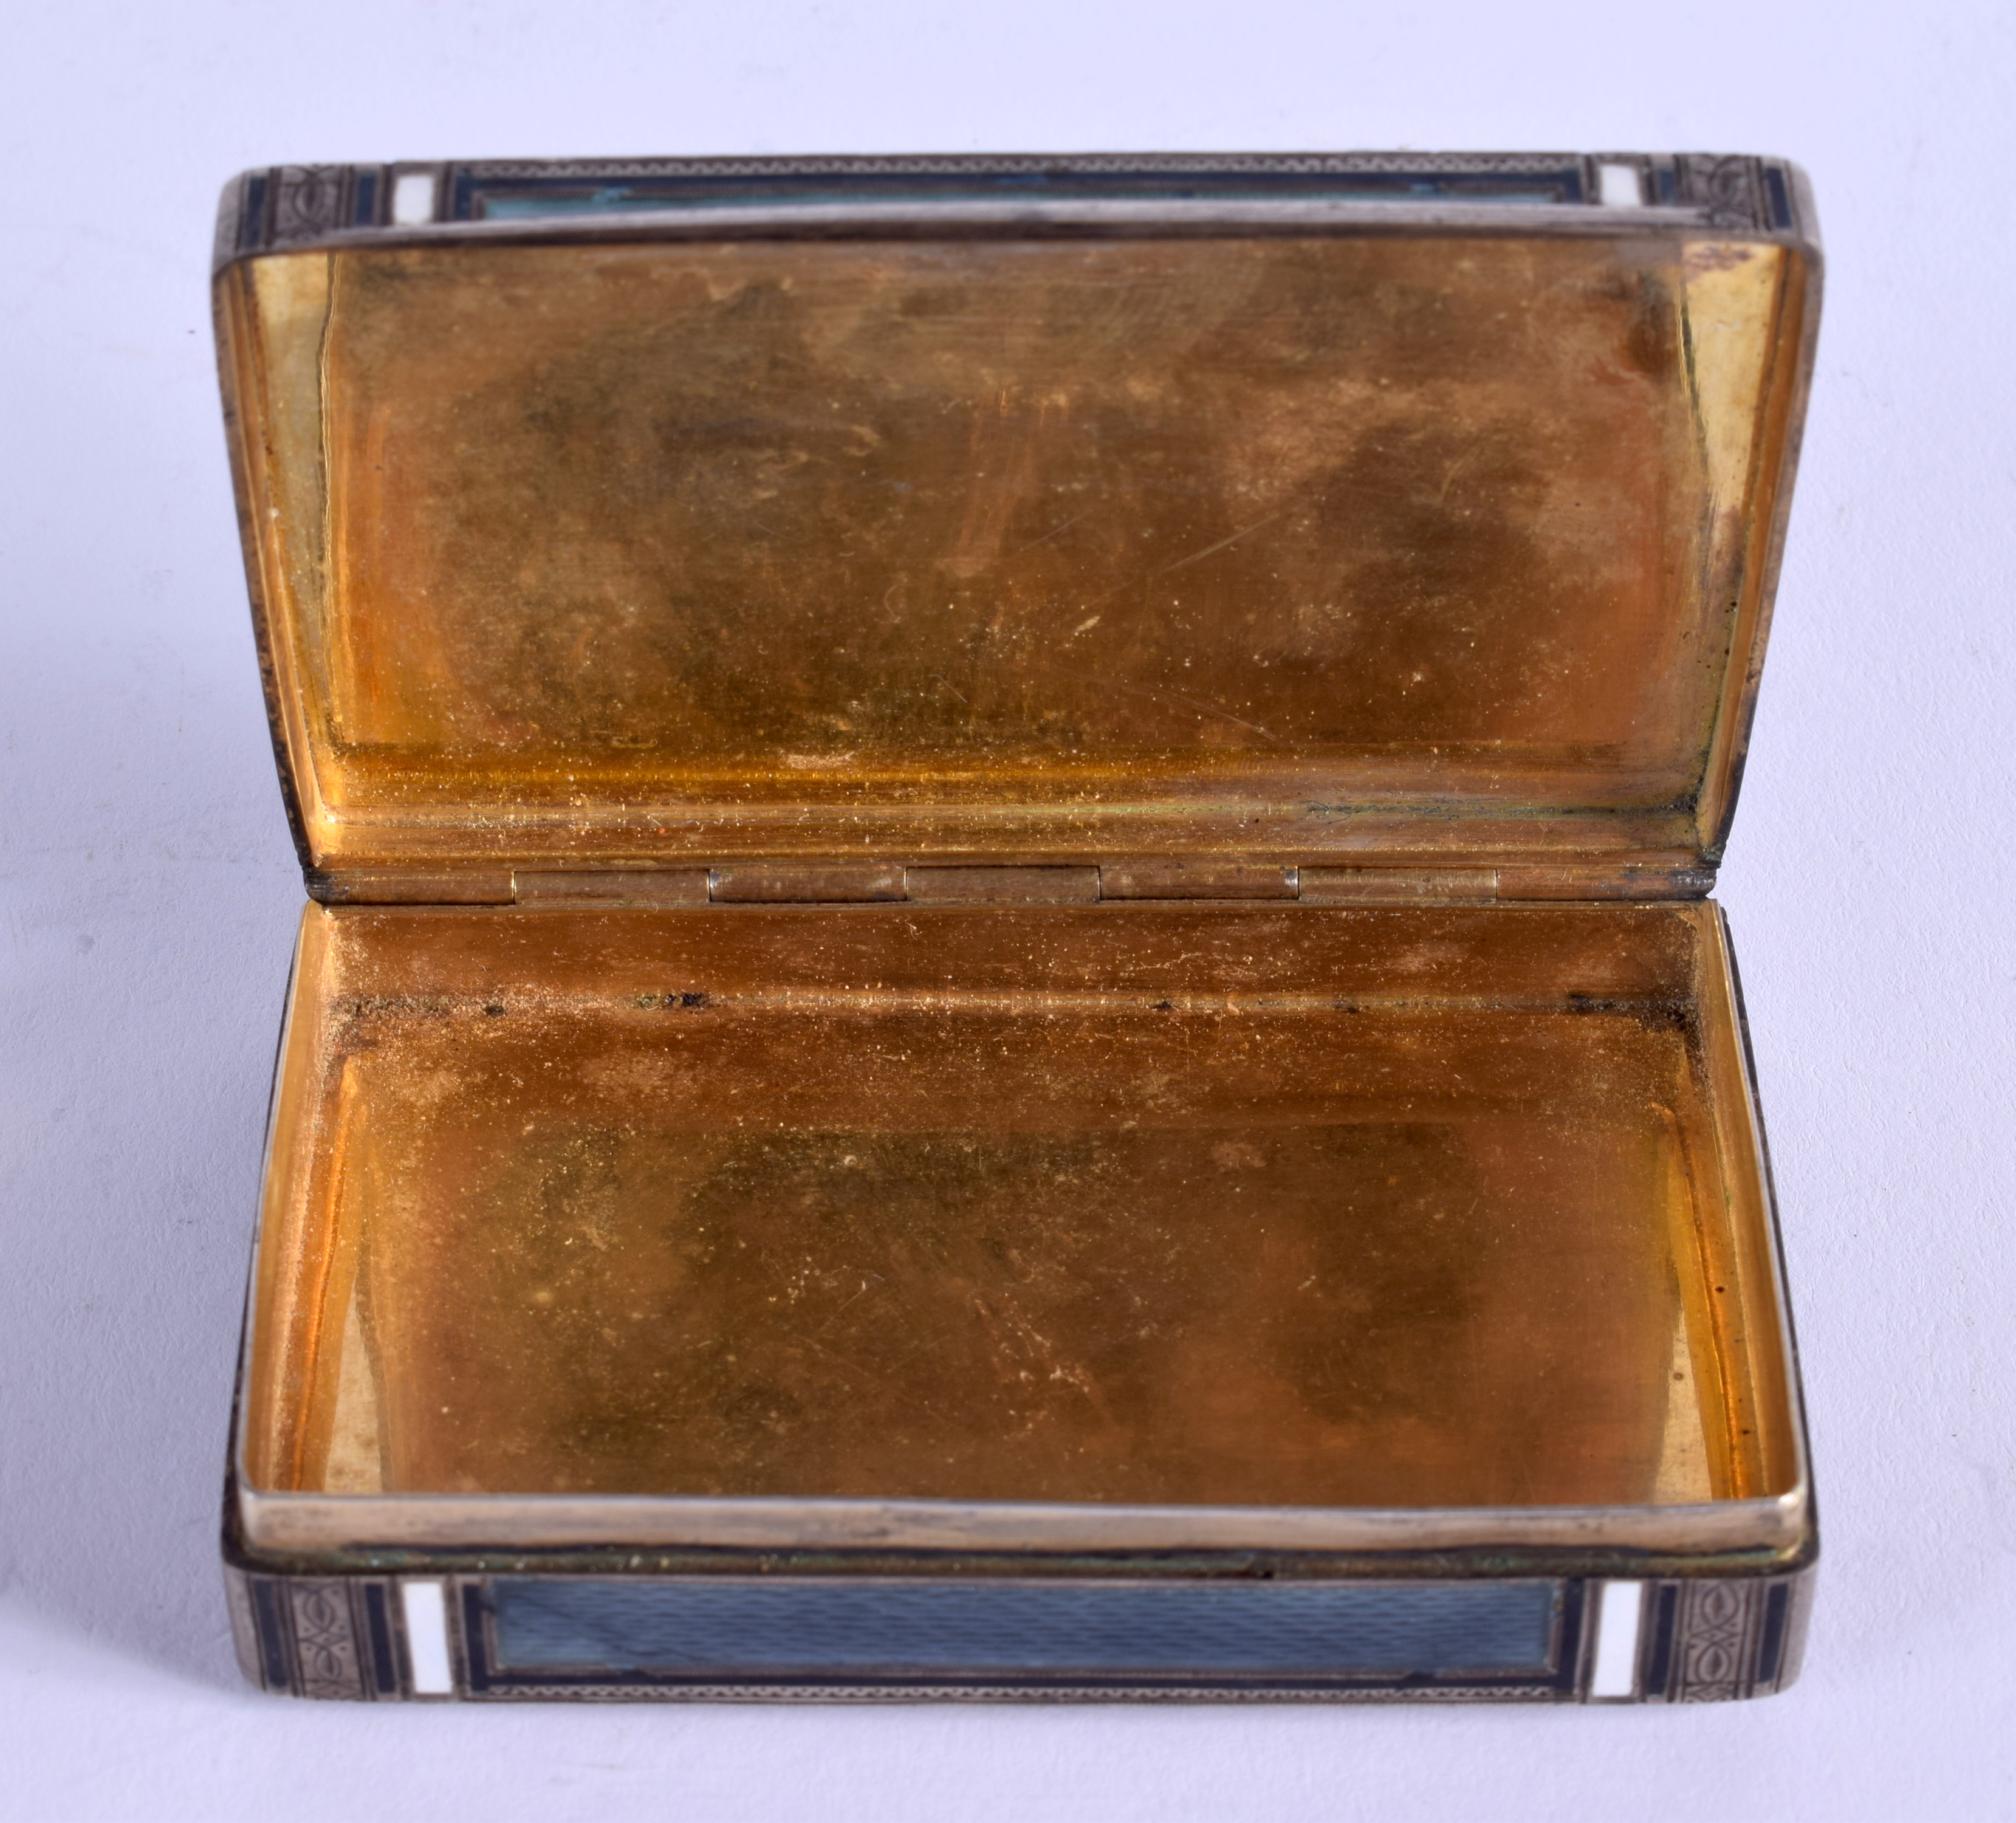 A FINE ANTIQUE SWISS SILVER AND ENAMEL RECTANGULAR SNUFF BOX painted with a tavern scene. 5.1 oz. 8. - Image 5 of 5